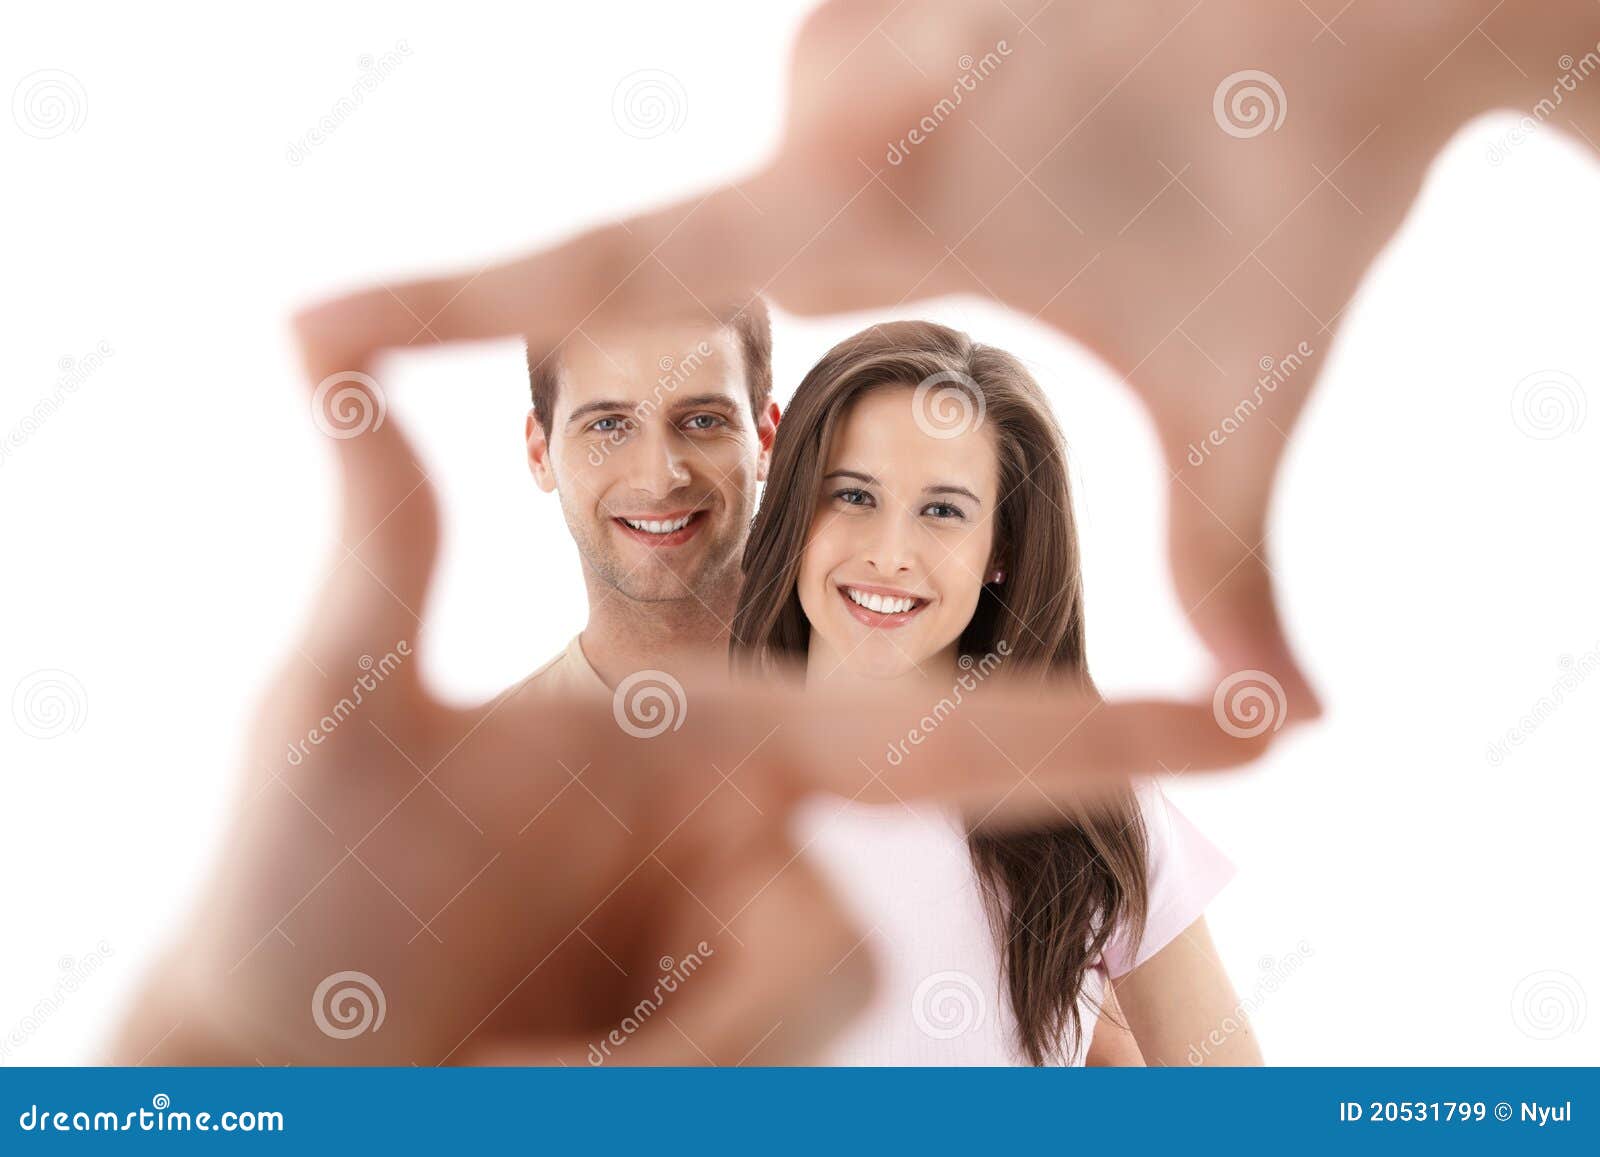 hands imitating frame for couple photo